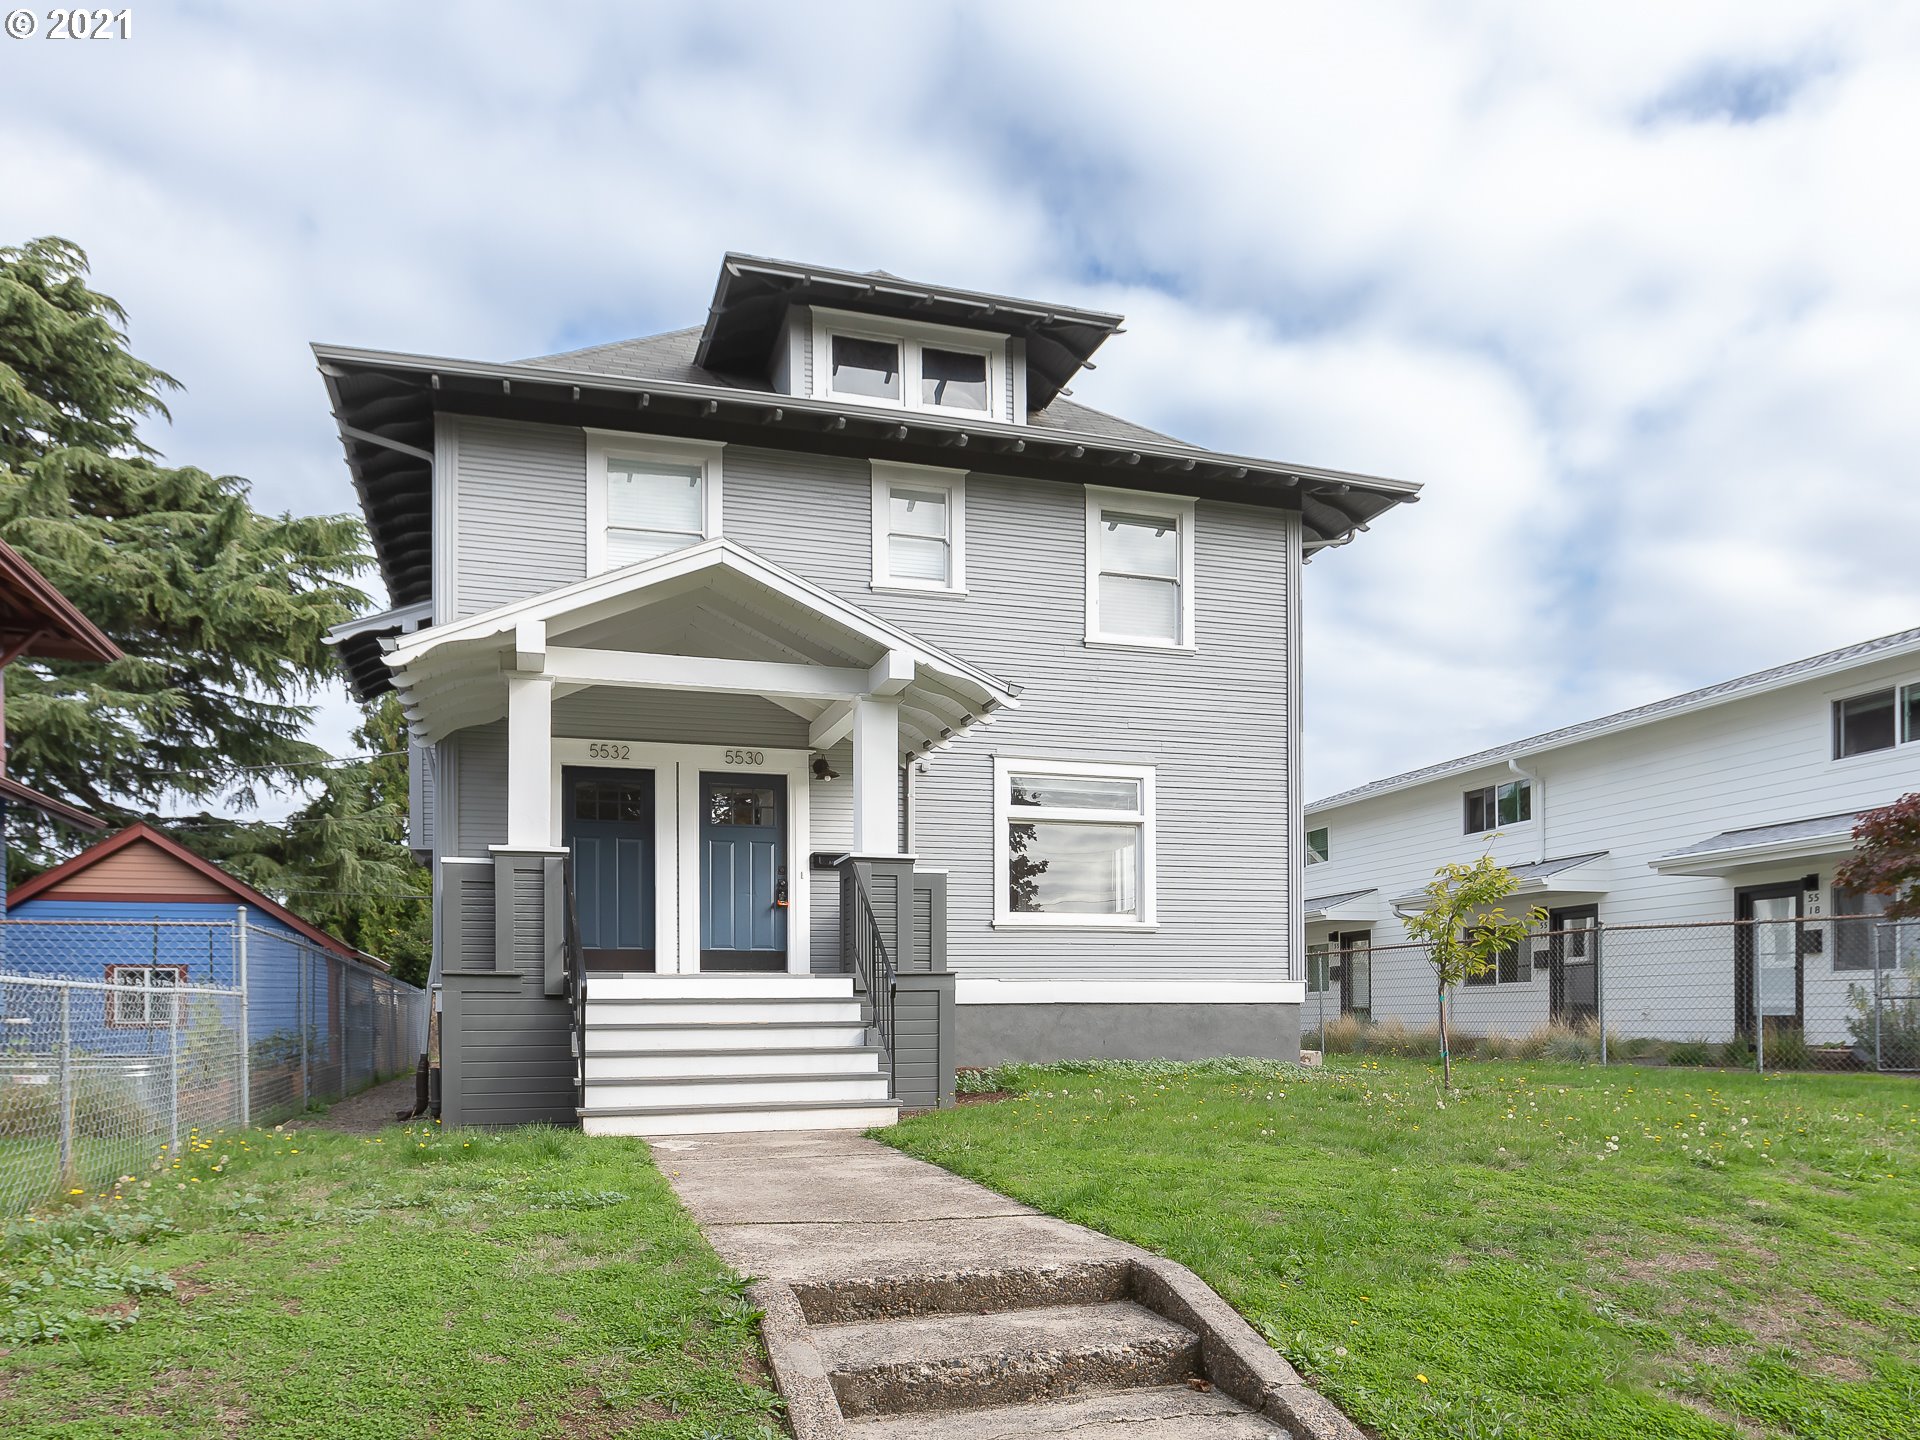 5532 N HAIGHT AVE (1 of 23)